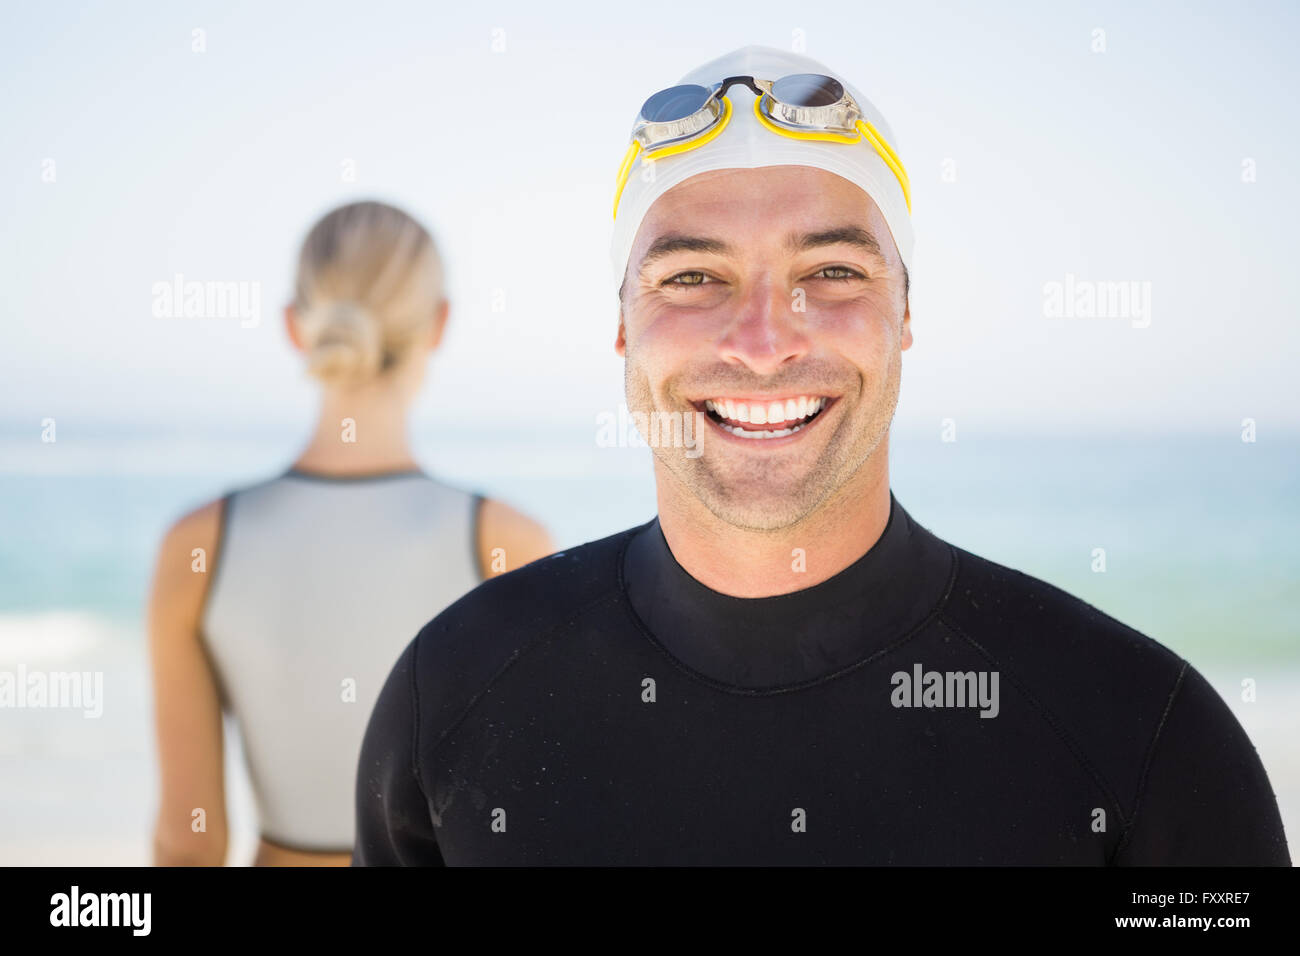 Handsome man wearing swimming cap and goggles with girlfriend in background Stock Photo